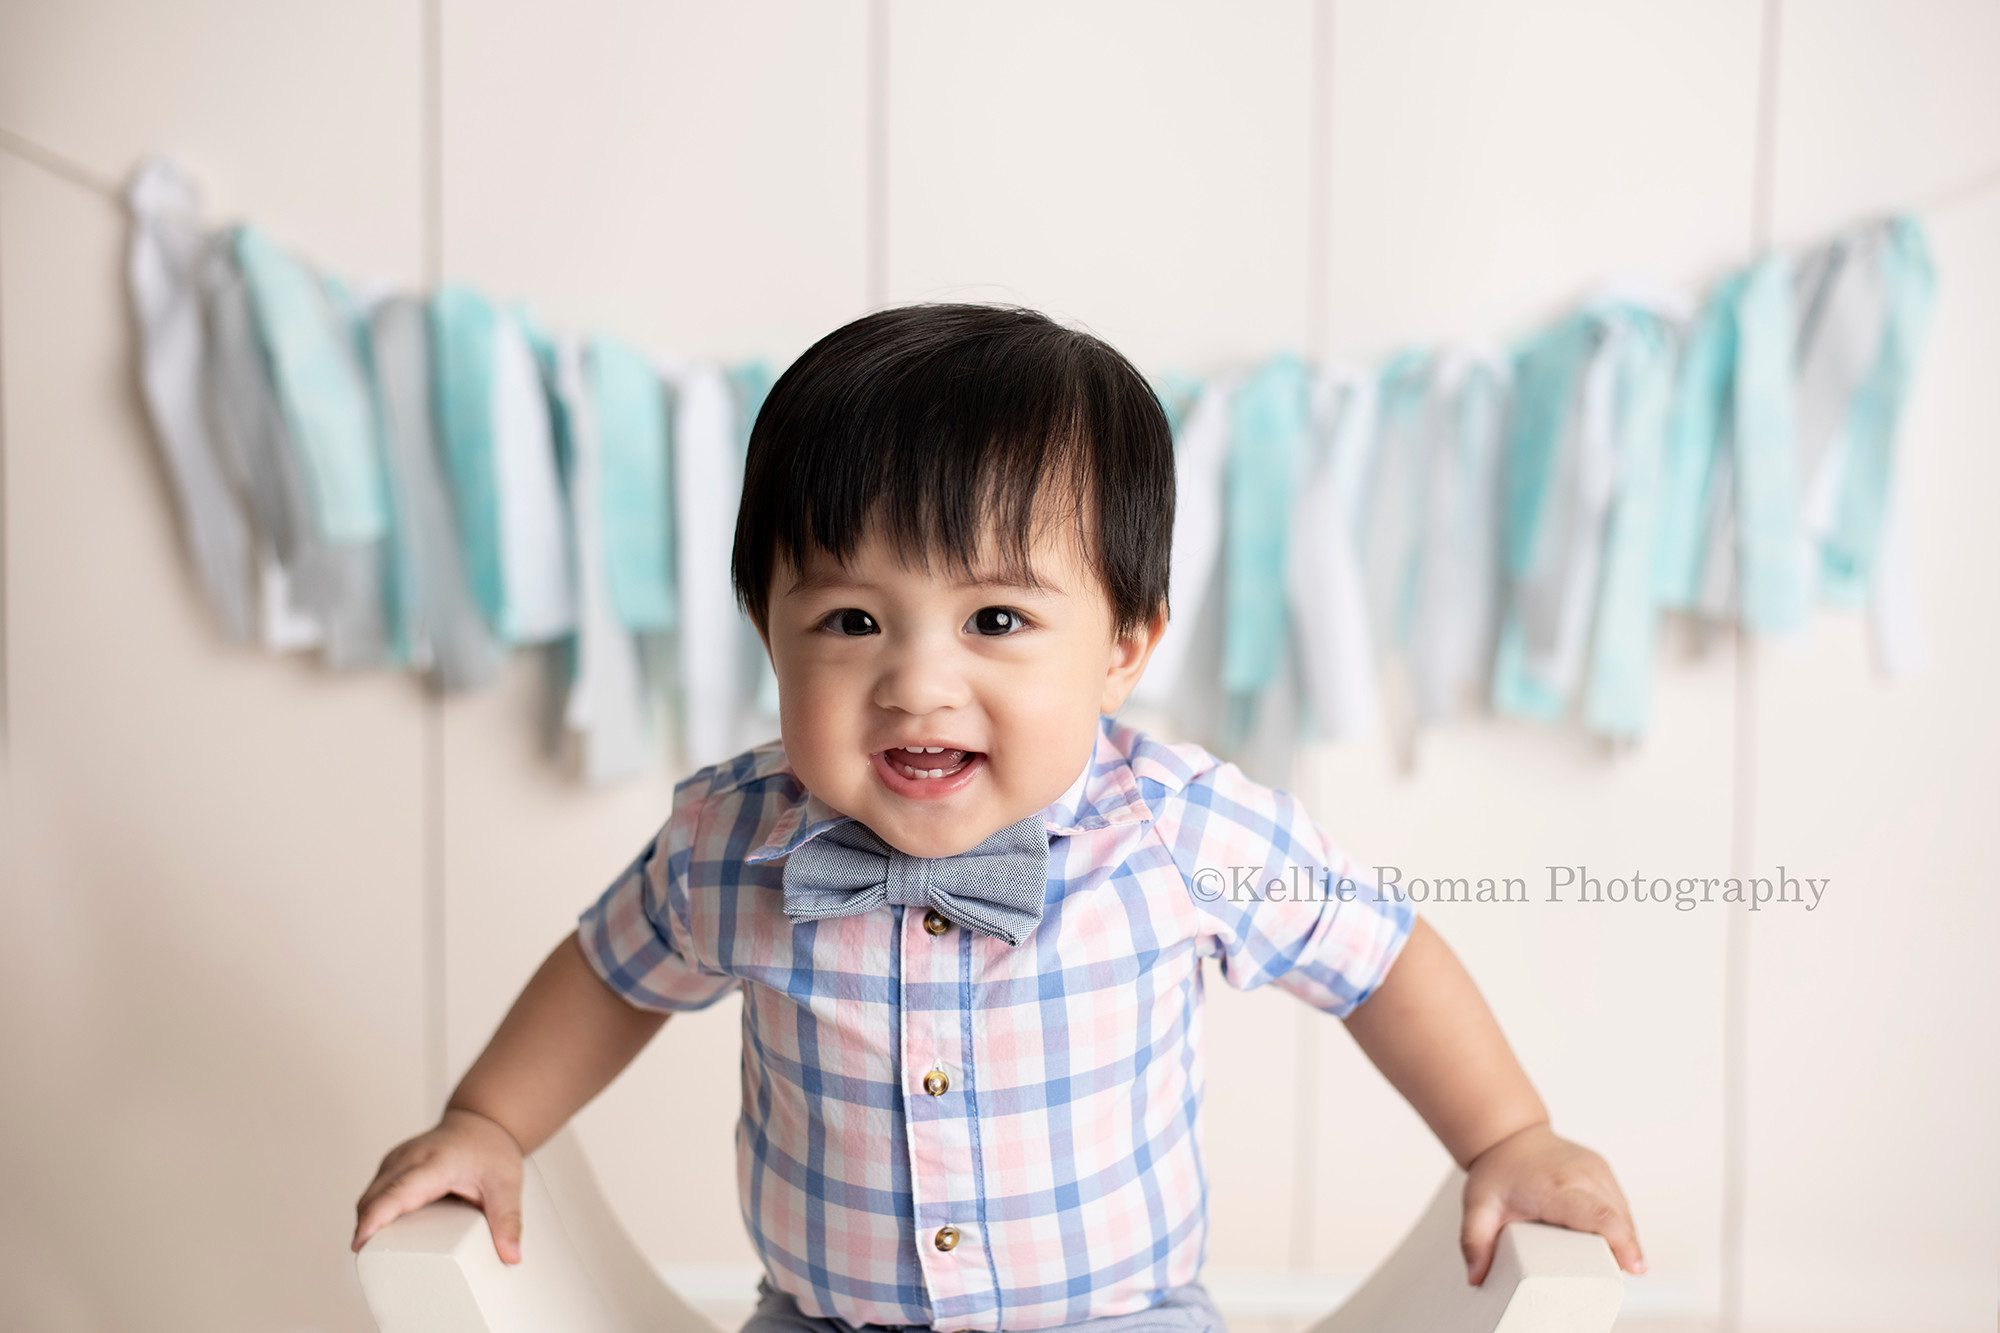 up up and away a one year old boy in Milwaukee photography studio sitting on a white curved bench smiling at the camera close up of his face. He is wearing pink and blue plaid shirt and a grey bowtie. He's in front of a cream wood backdrop with rag banner